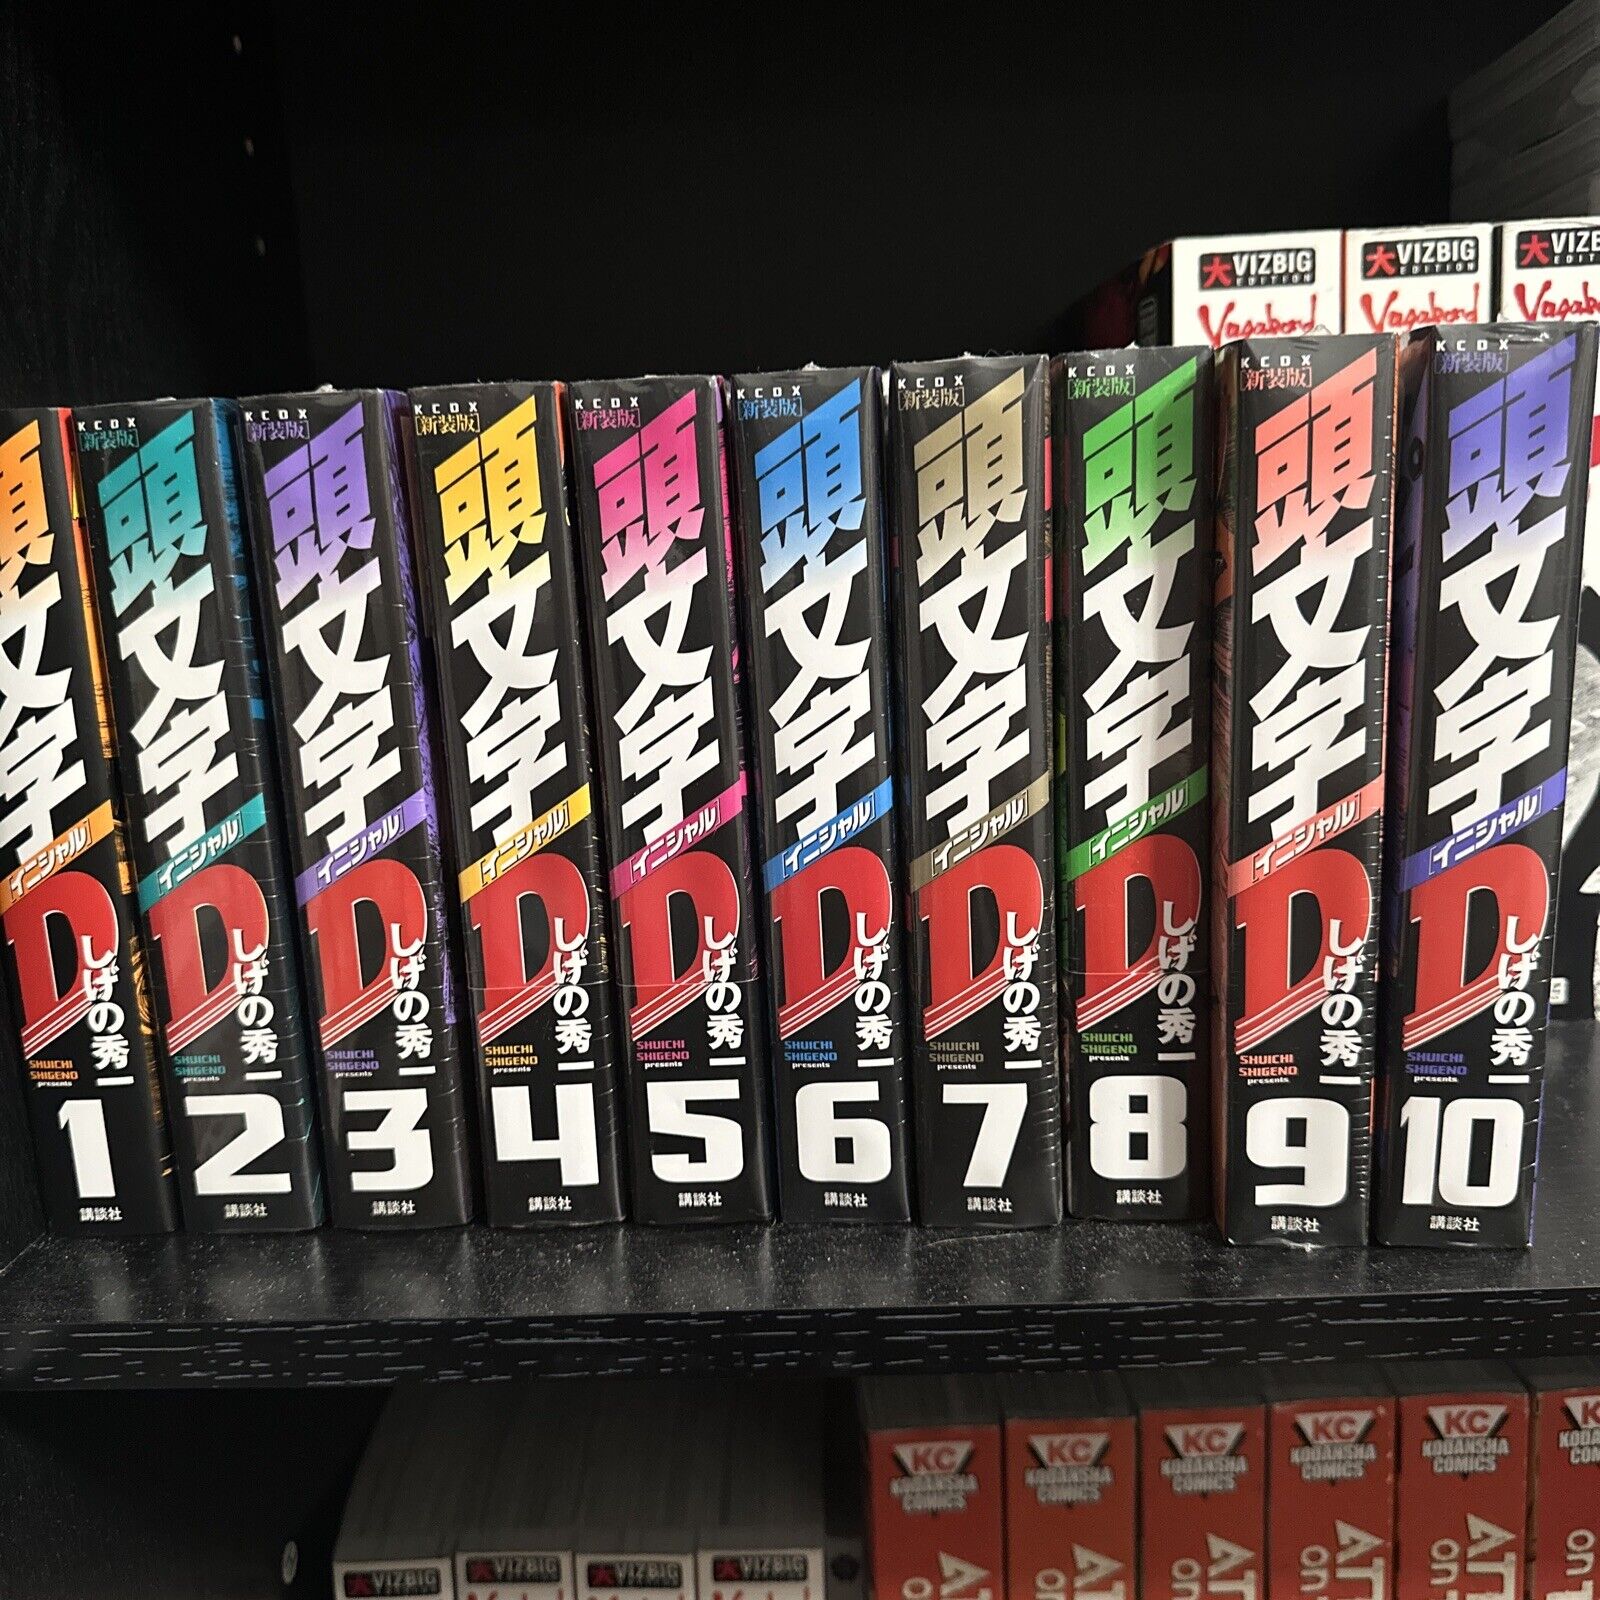 Initial D comic book New Edition vol. 1-10 Japanese Manga (Amazon Japan Special)